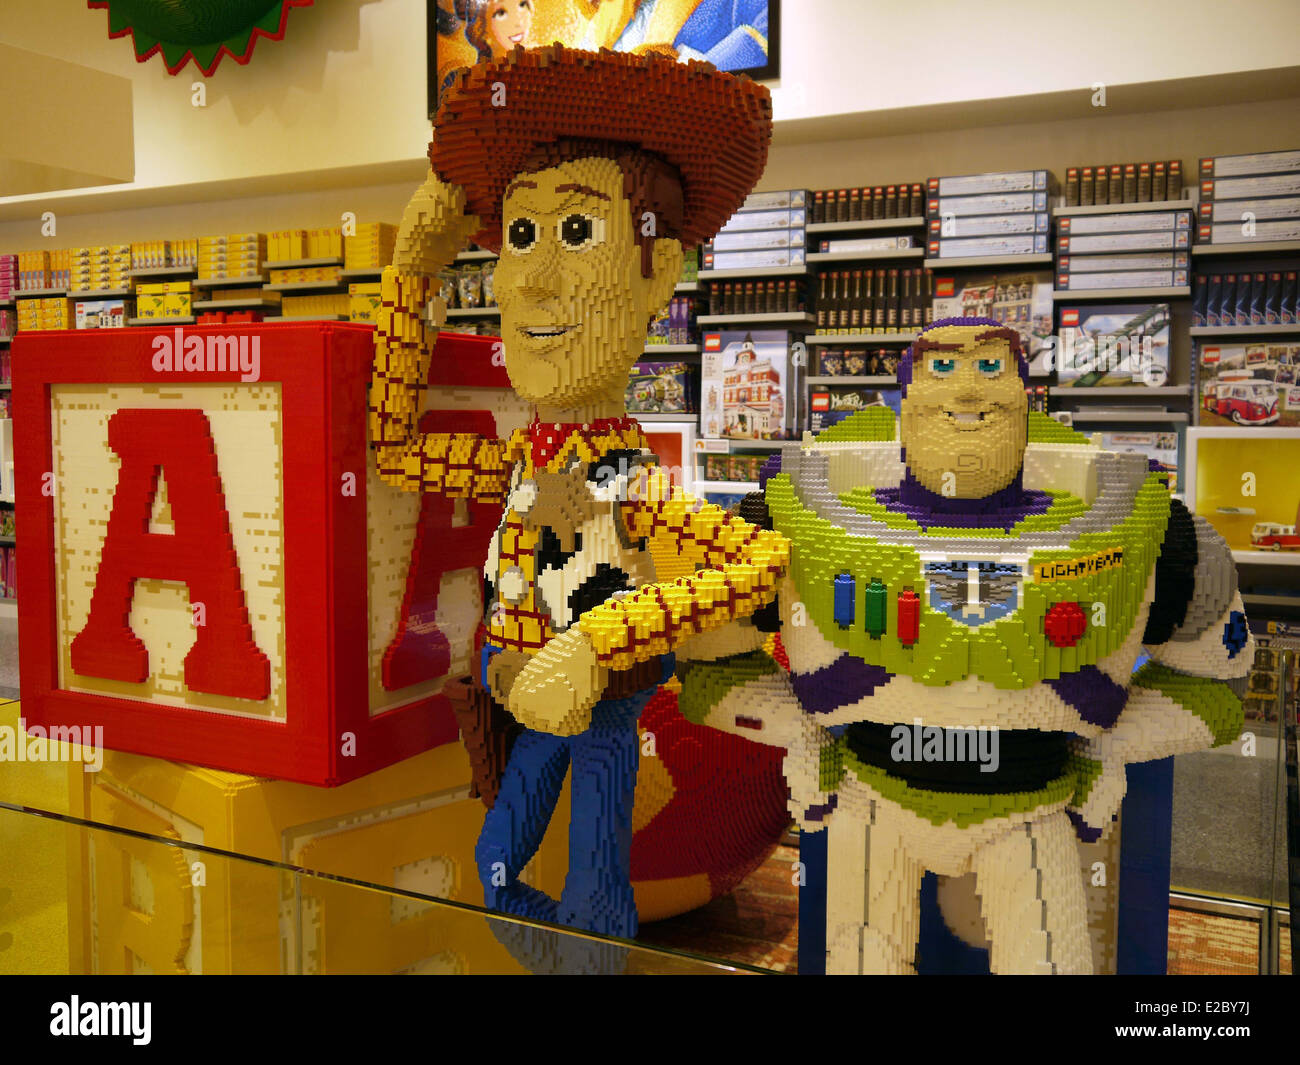 Buzz Lightyear and Woody figure made of Lego - This image was taken in the Lego Shop in Euro Disney Stock Photo